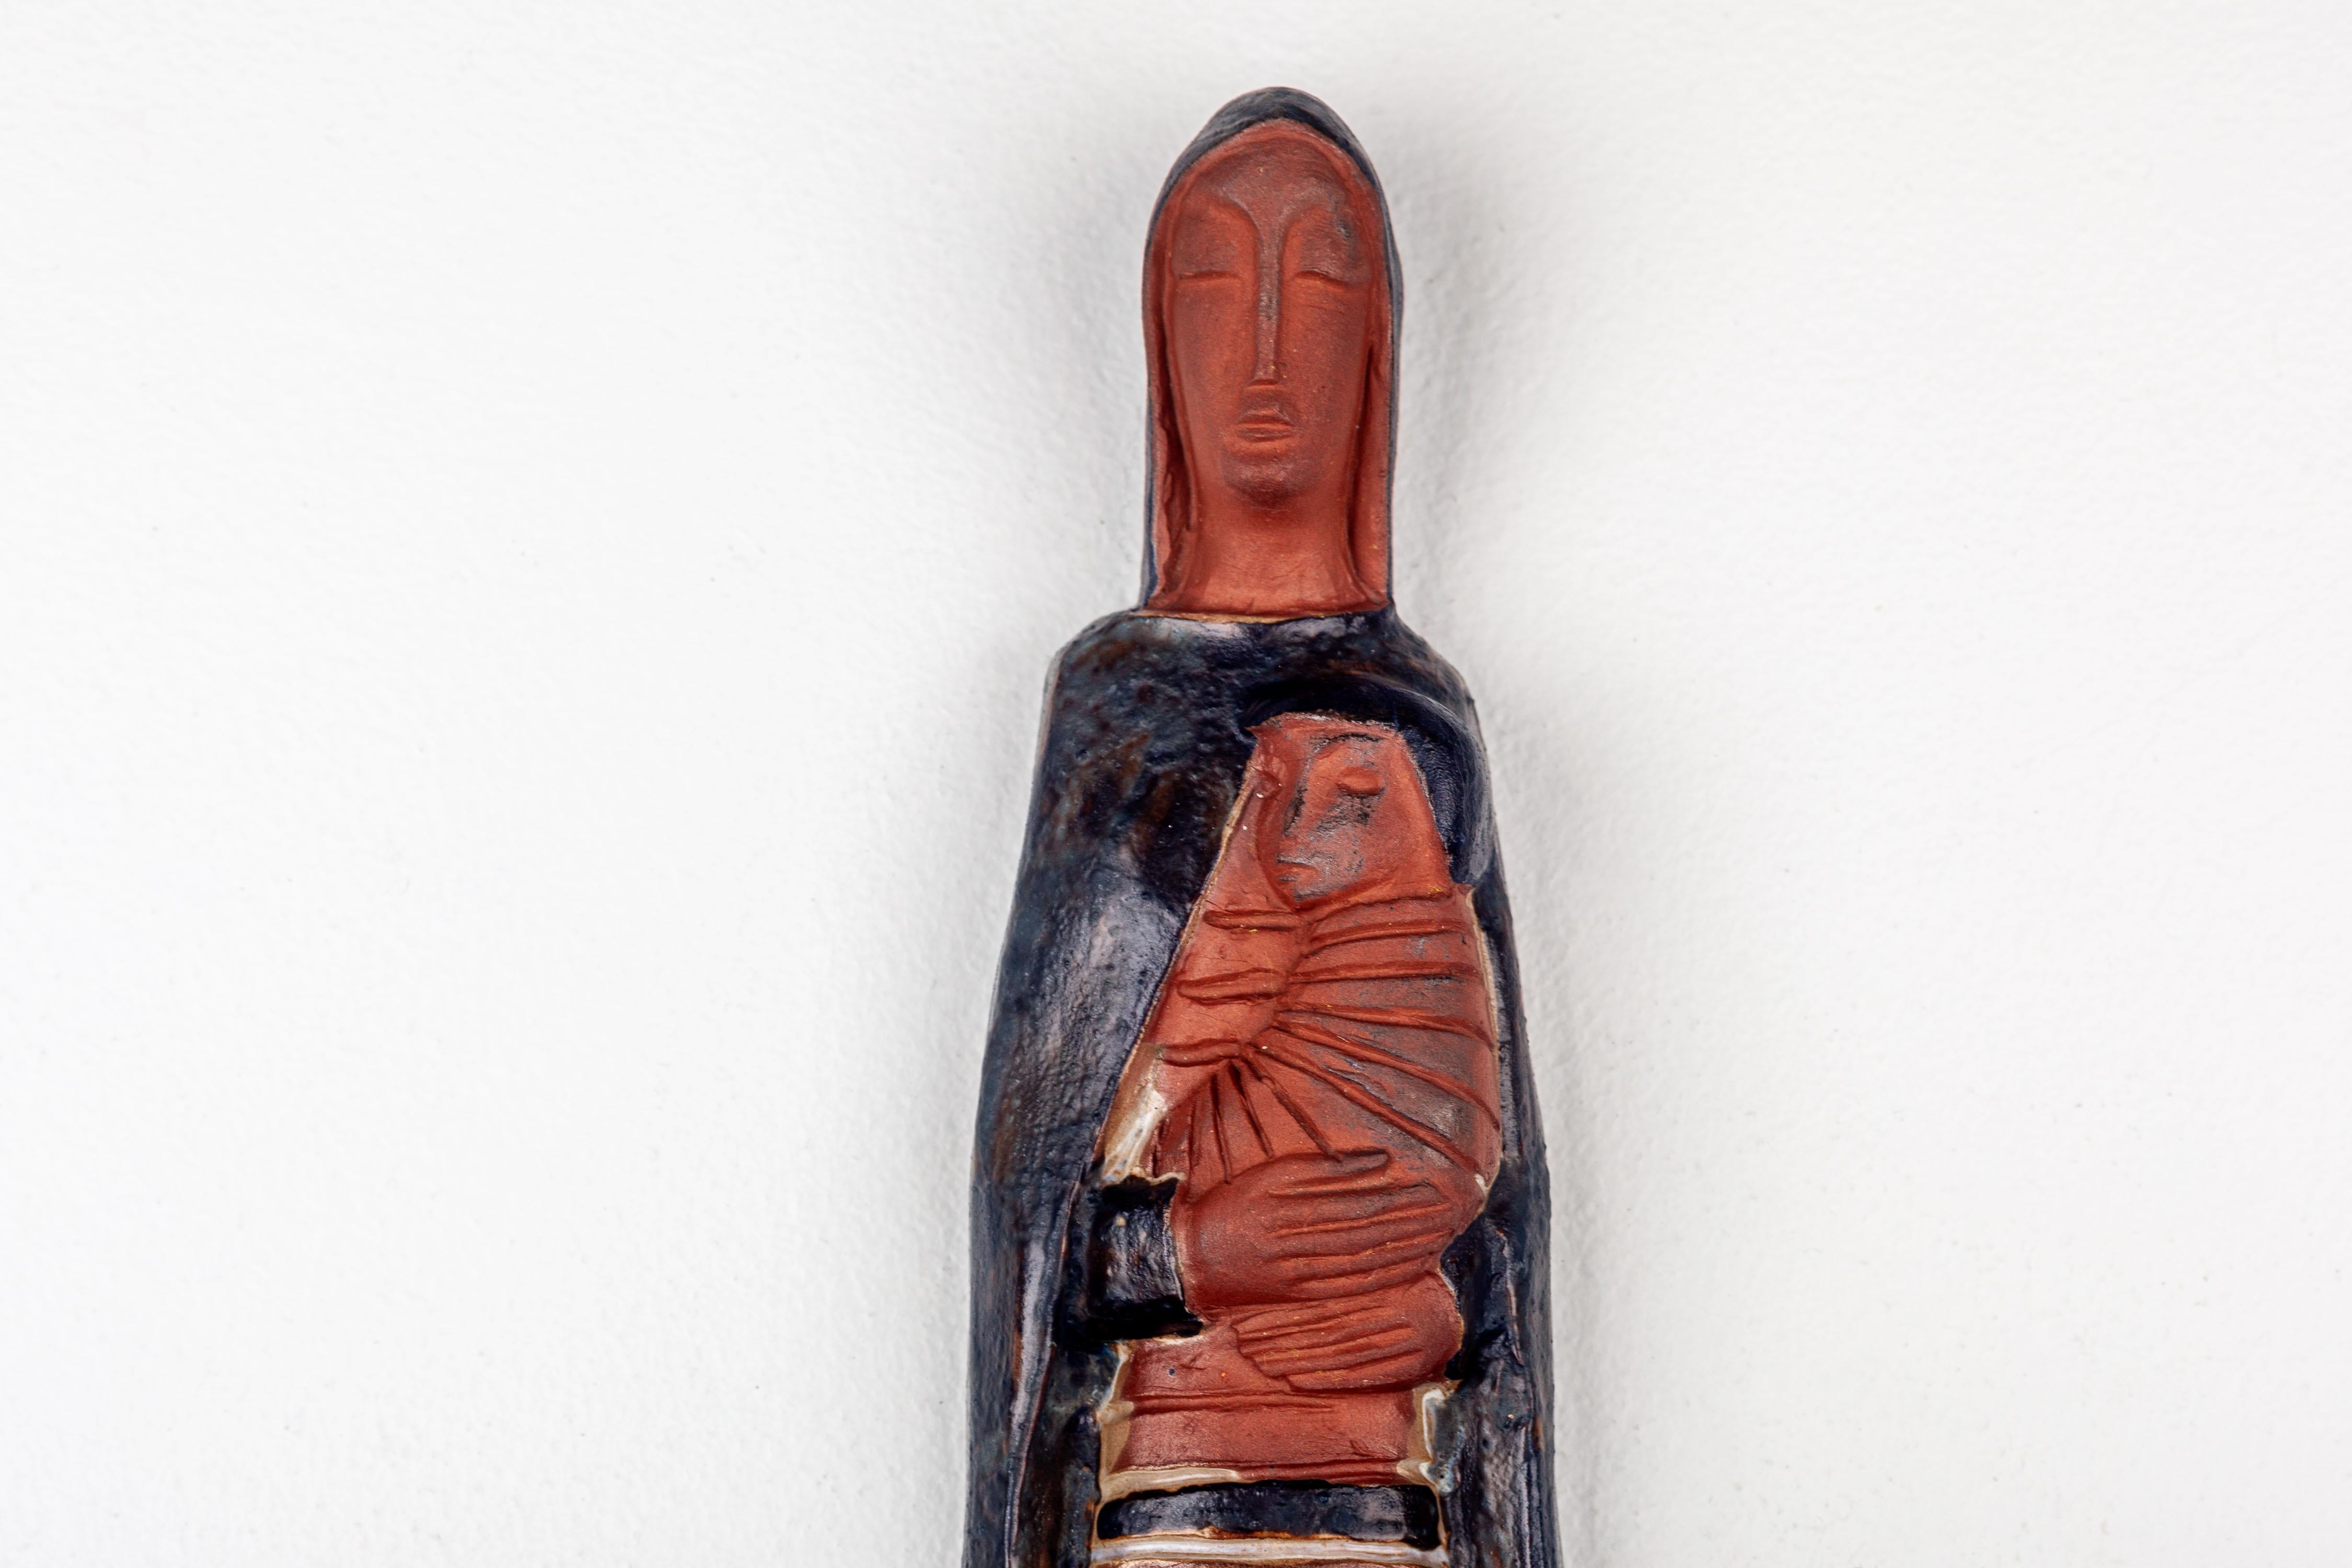 10-inch Virgin Mary and Child Jesus, draped in a hooded cape and a striped dress in terracotta and black. A serene Virgin Mary and a captivated Child Jesus, both with their head covered.

Our European cross collection (Tradition & Modernism) is